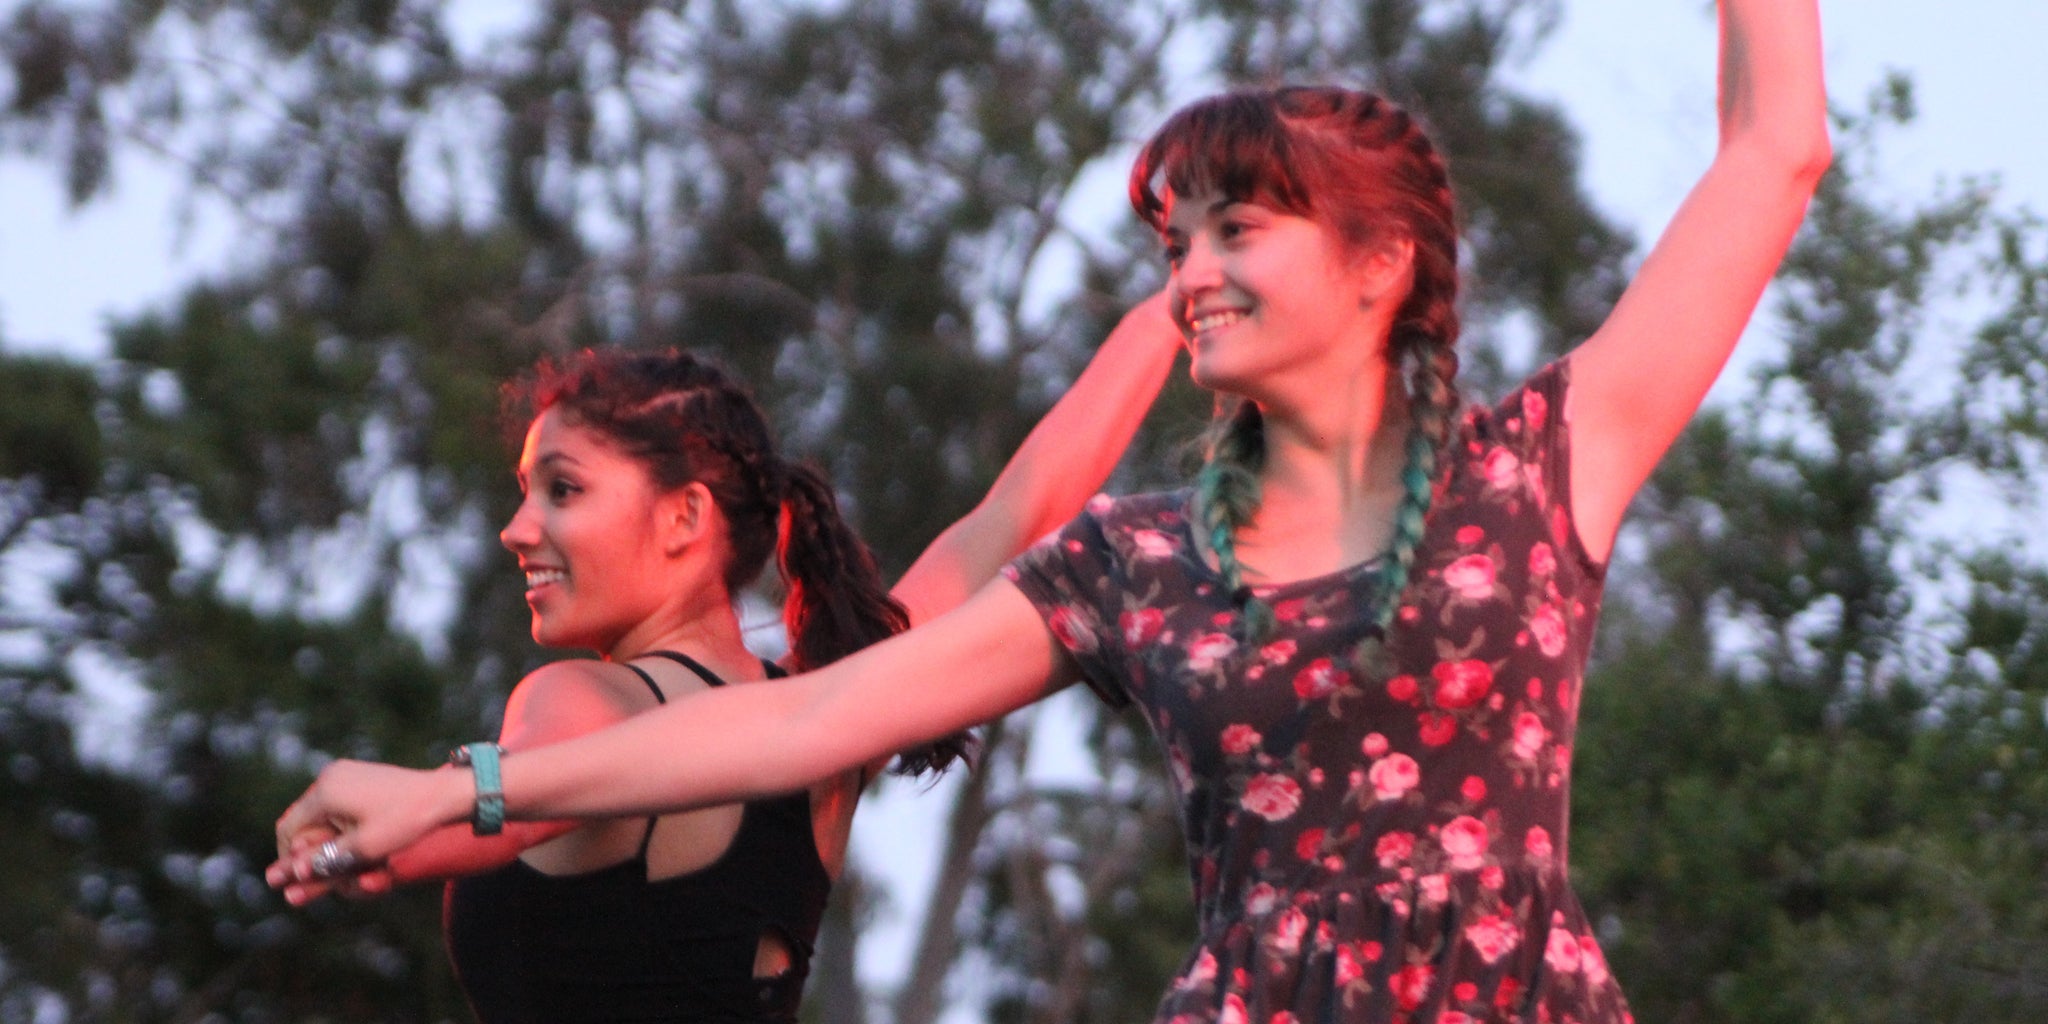 Student dancers perform during a campus event. 